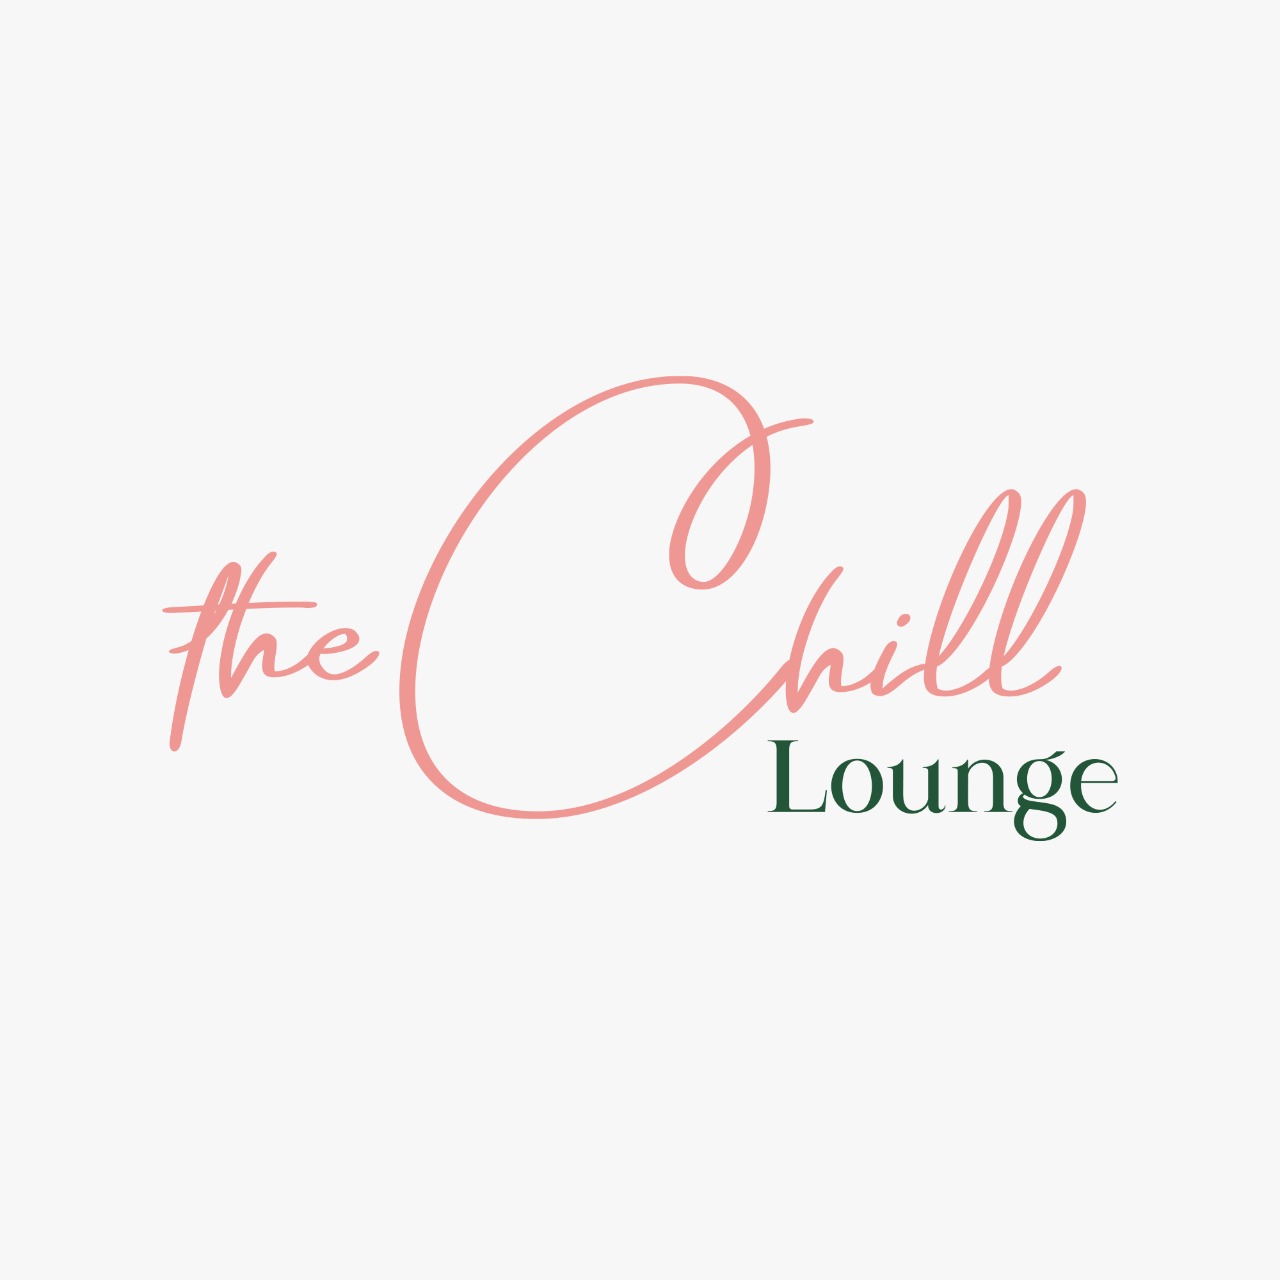 https://www.mncjobsgulf.com/company/the-chill-lounge